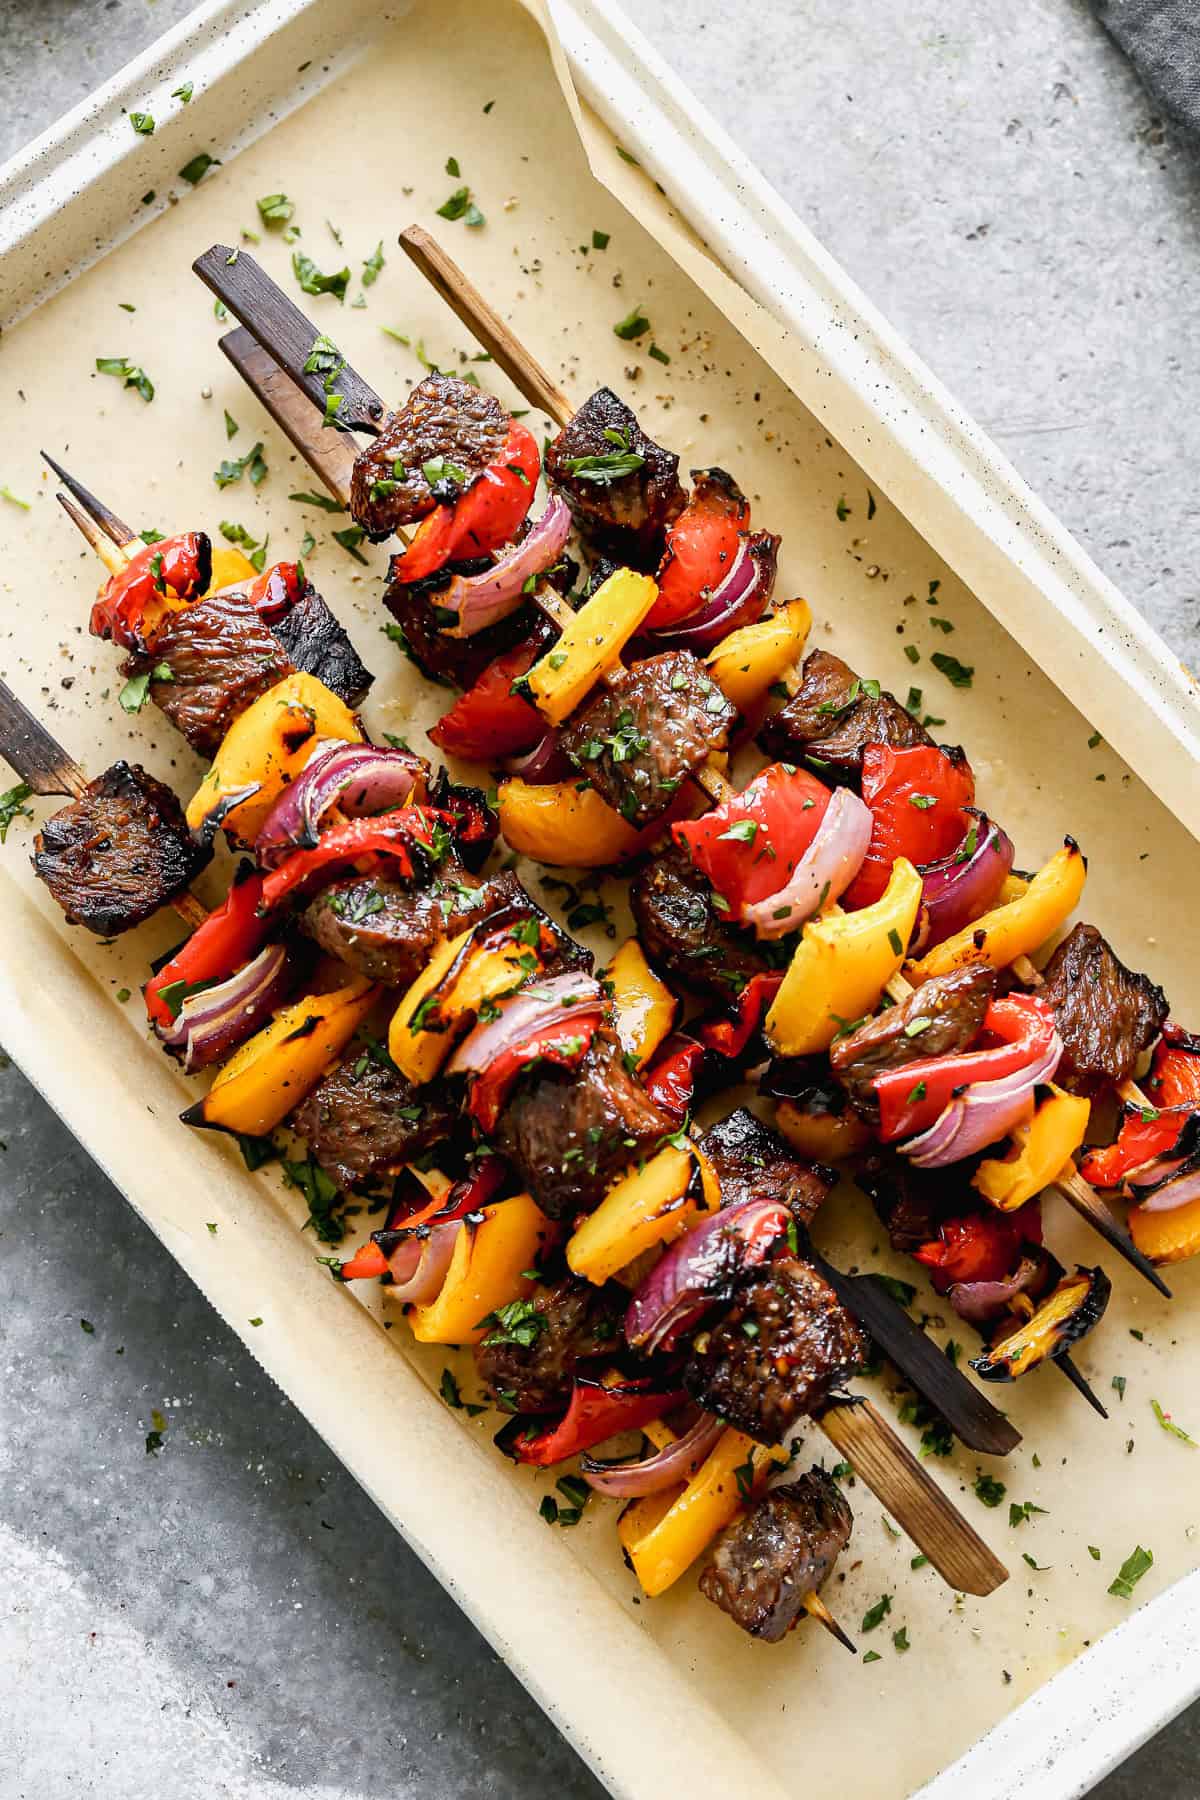 A pan of grilled Steak Kabobs with steak, red and yellow bell pepper, and red onion, ready to serve.